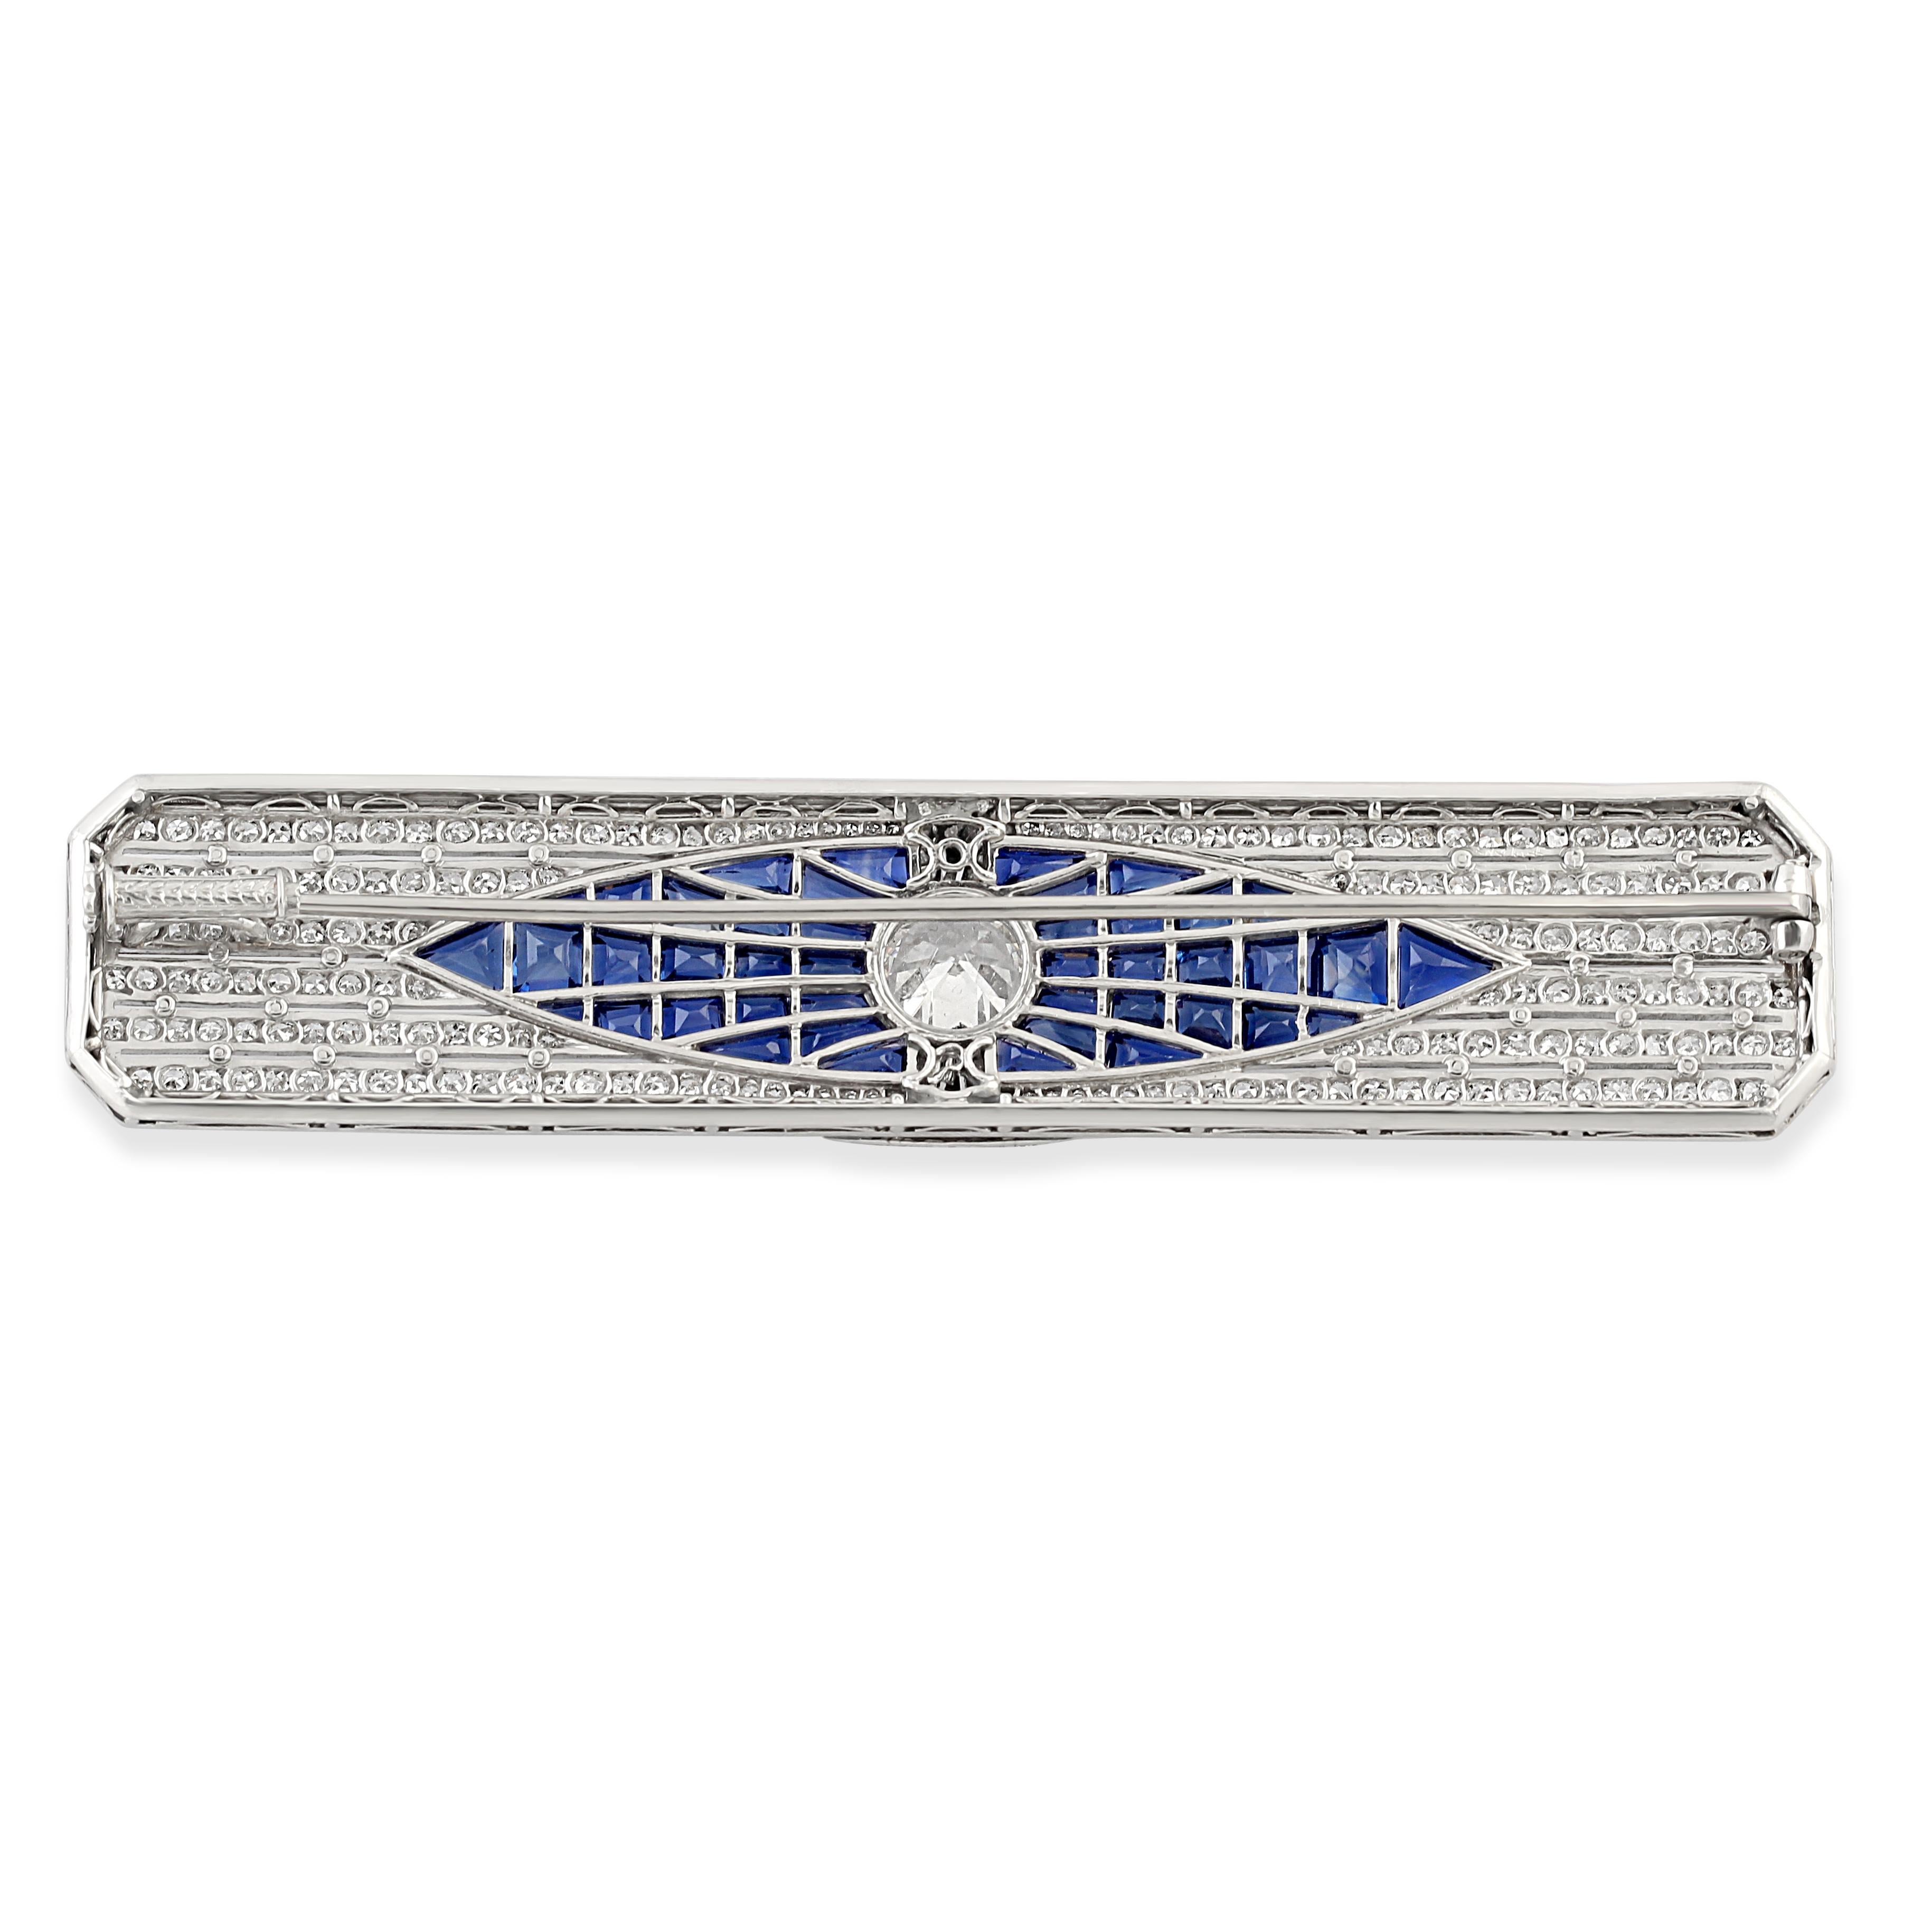 A striking Art Deco bar brooch crafted from platinum set with sapphires and diamonds. The centre stone = apx 1.90 carats surrounded by calibre-cut sapphires and diamonds in a classic geometric design. A fine example of Art Deco craftsmanship. 